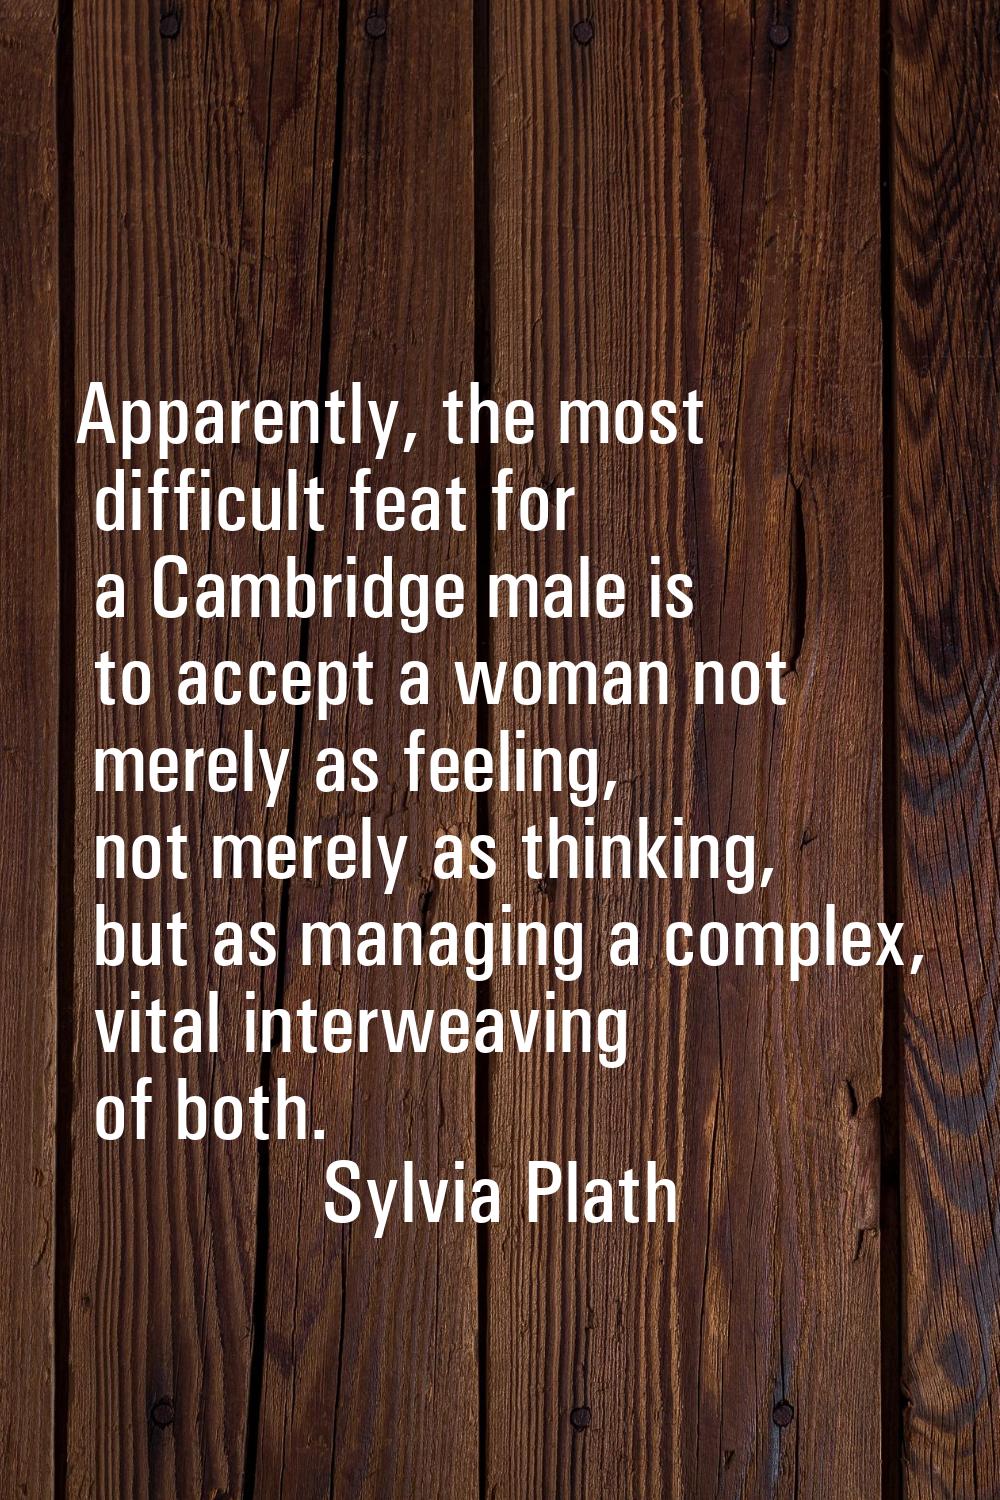 Apparently, the most difficult feat for a Cambridge male is to accept a woman not merely as feeling